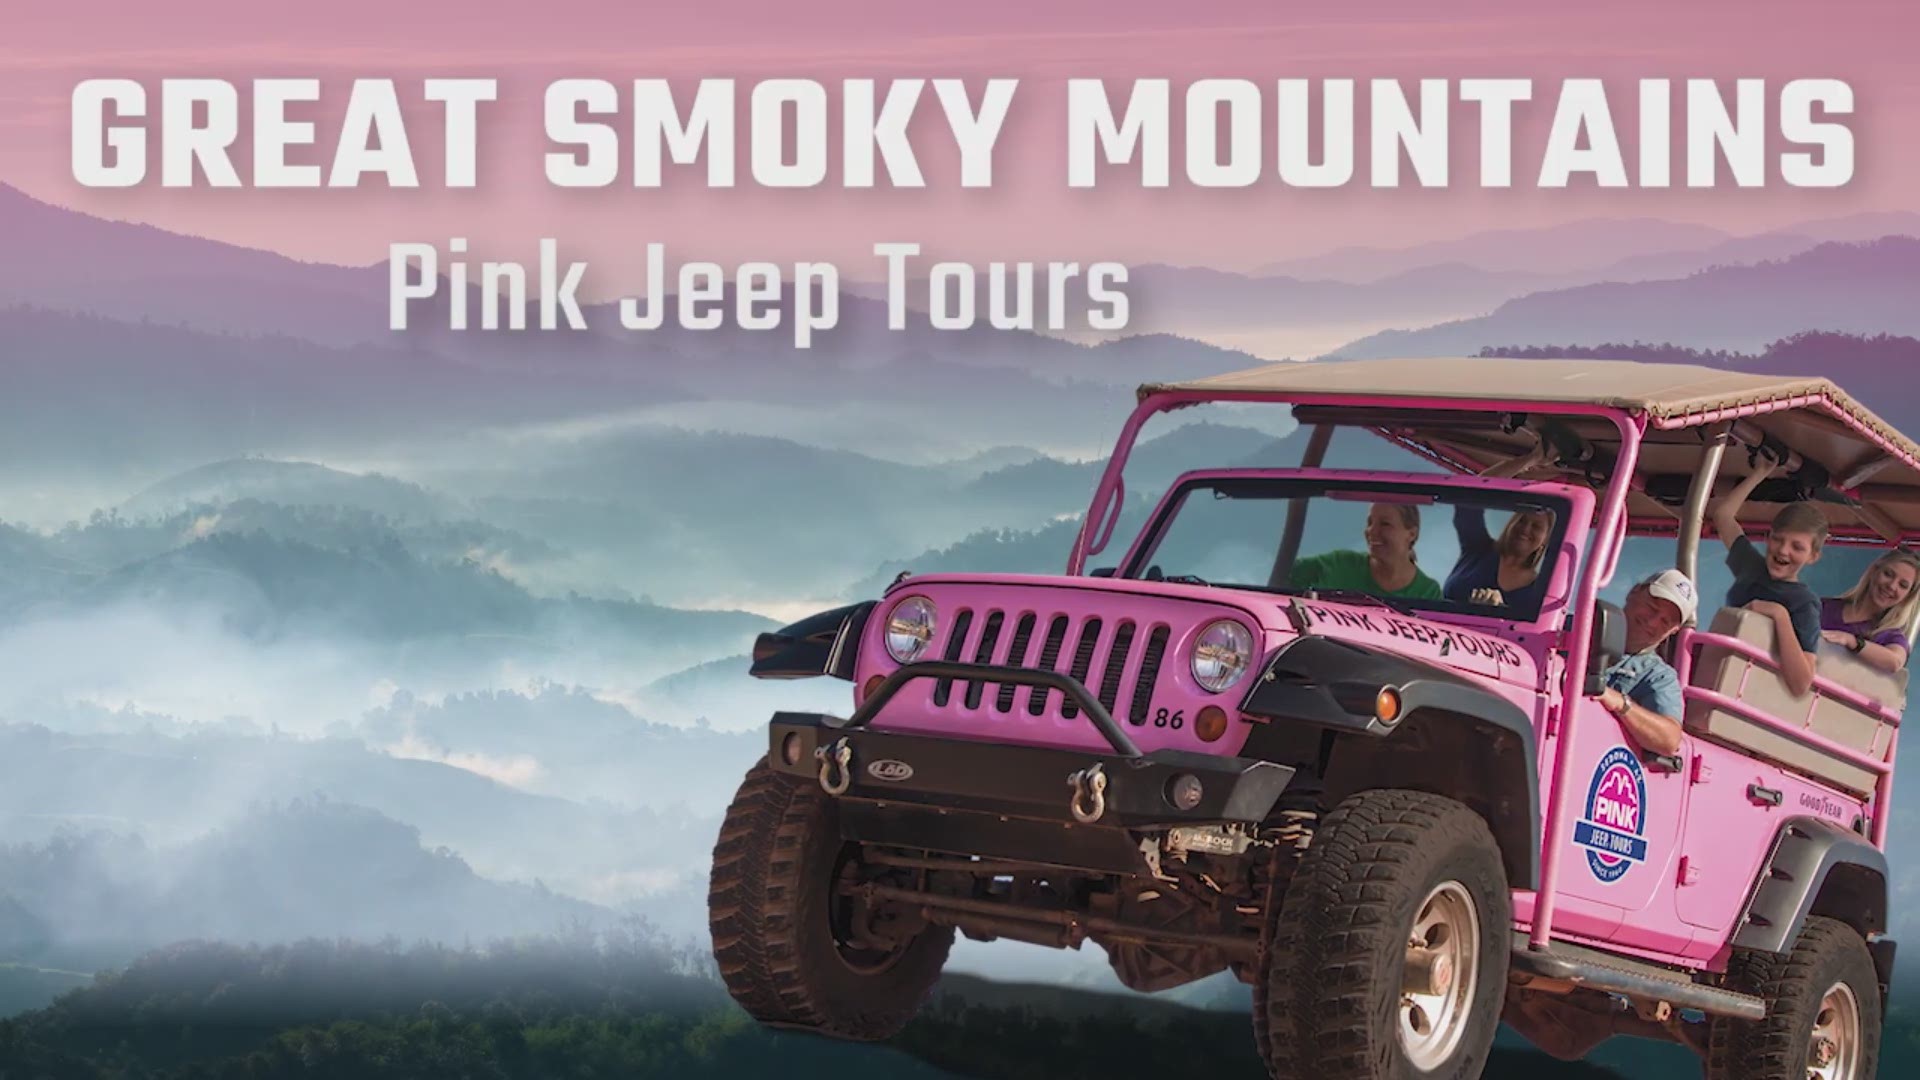 Tourists can experience a new adventure in the Smokies with PINK Jeeps. Video courtesy: Pink Jeep Tours